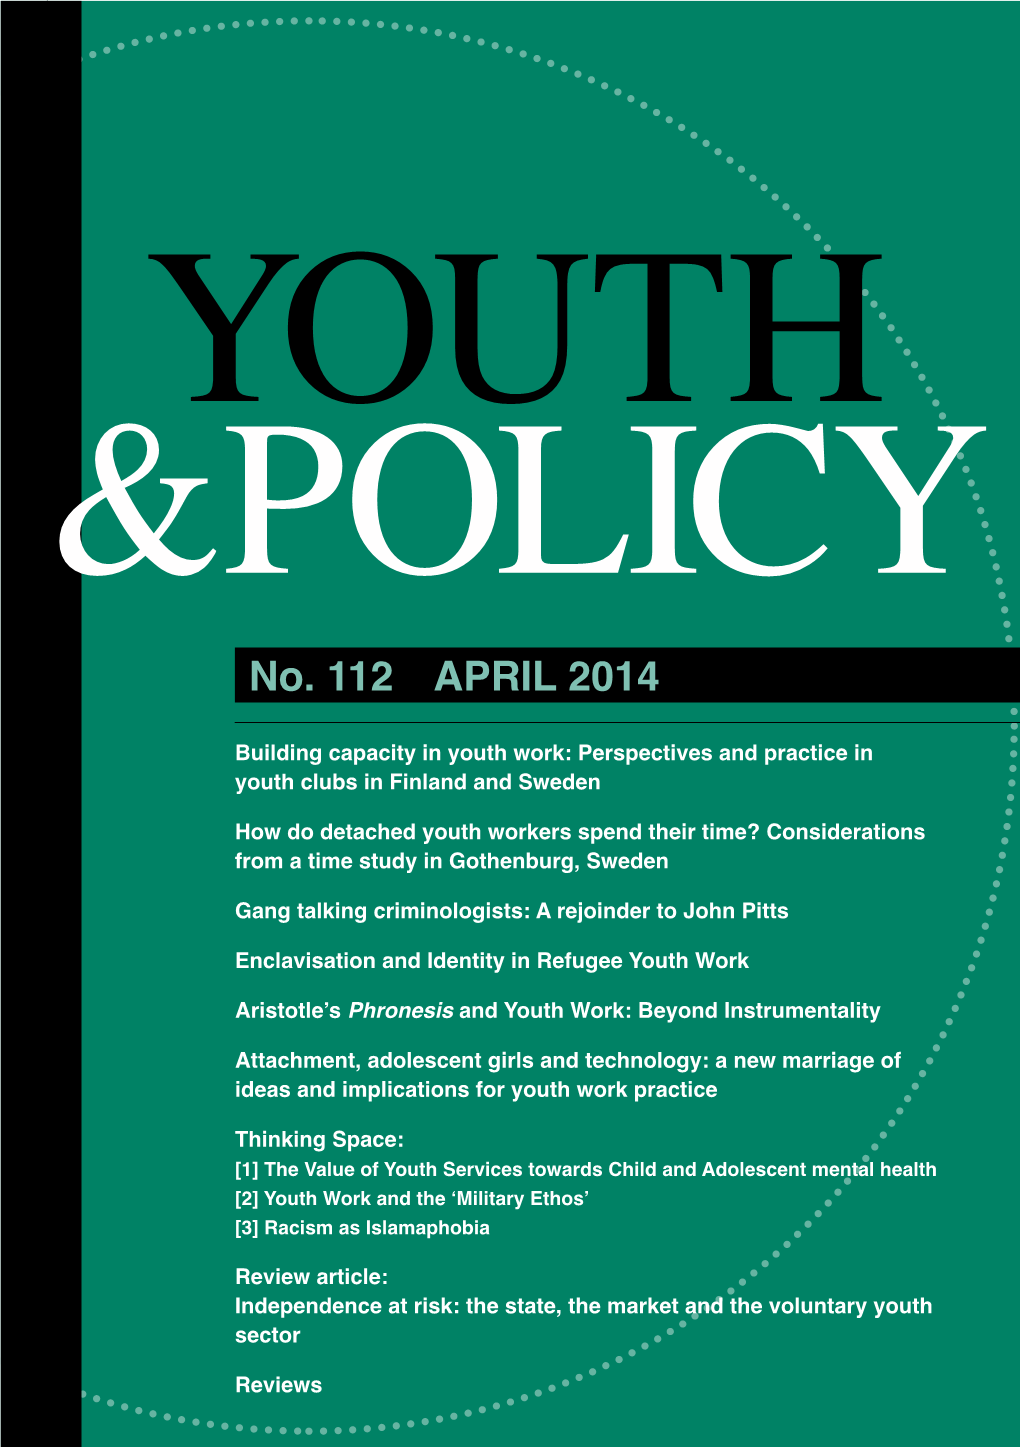 Youth and Policy Article, ‘Youth Work in a Changing Policy Landscape: the View from England’ (Davies, 2013: 13-14)